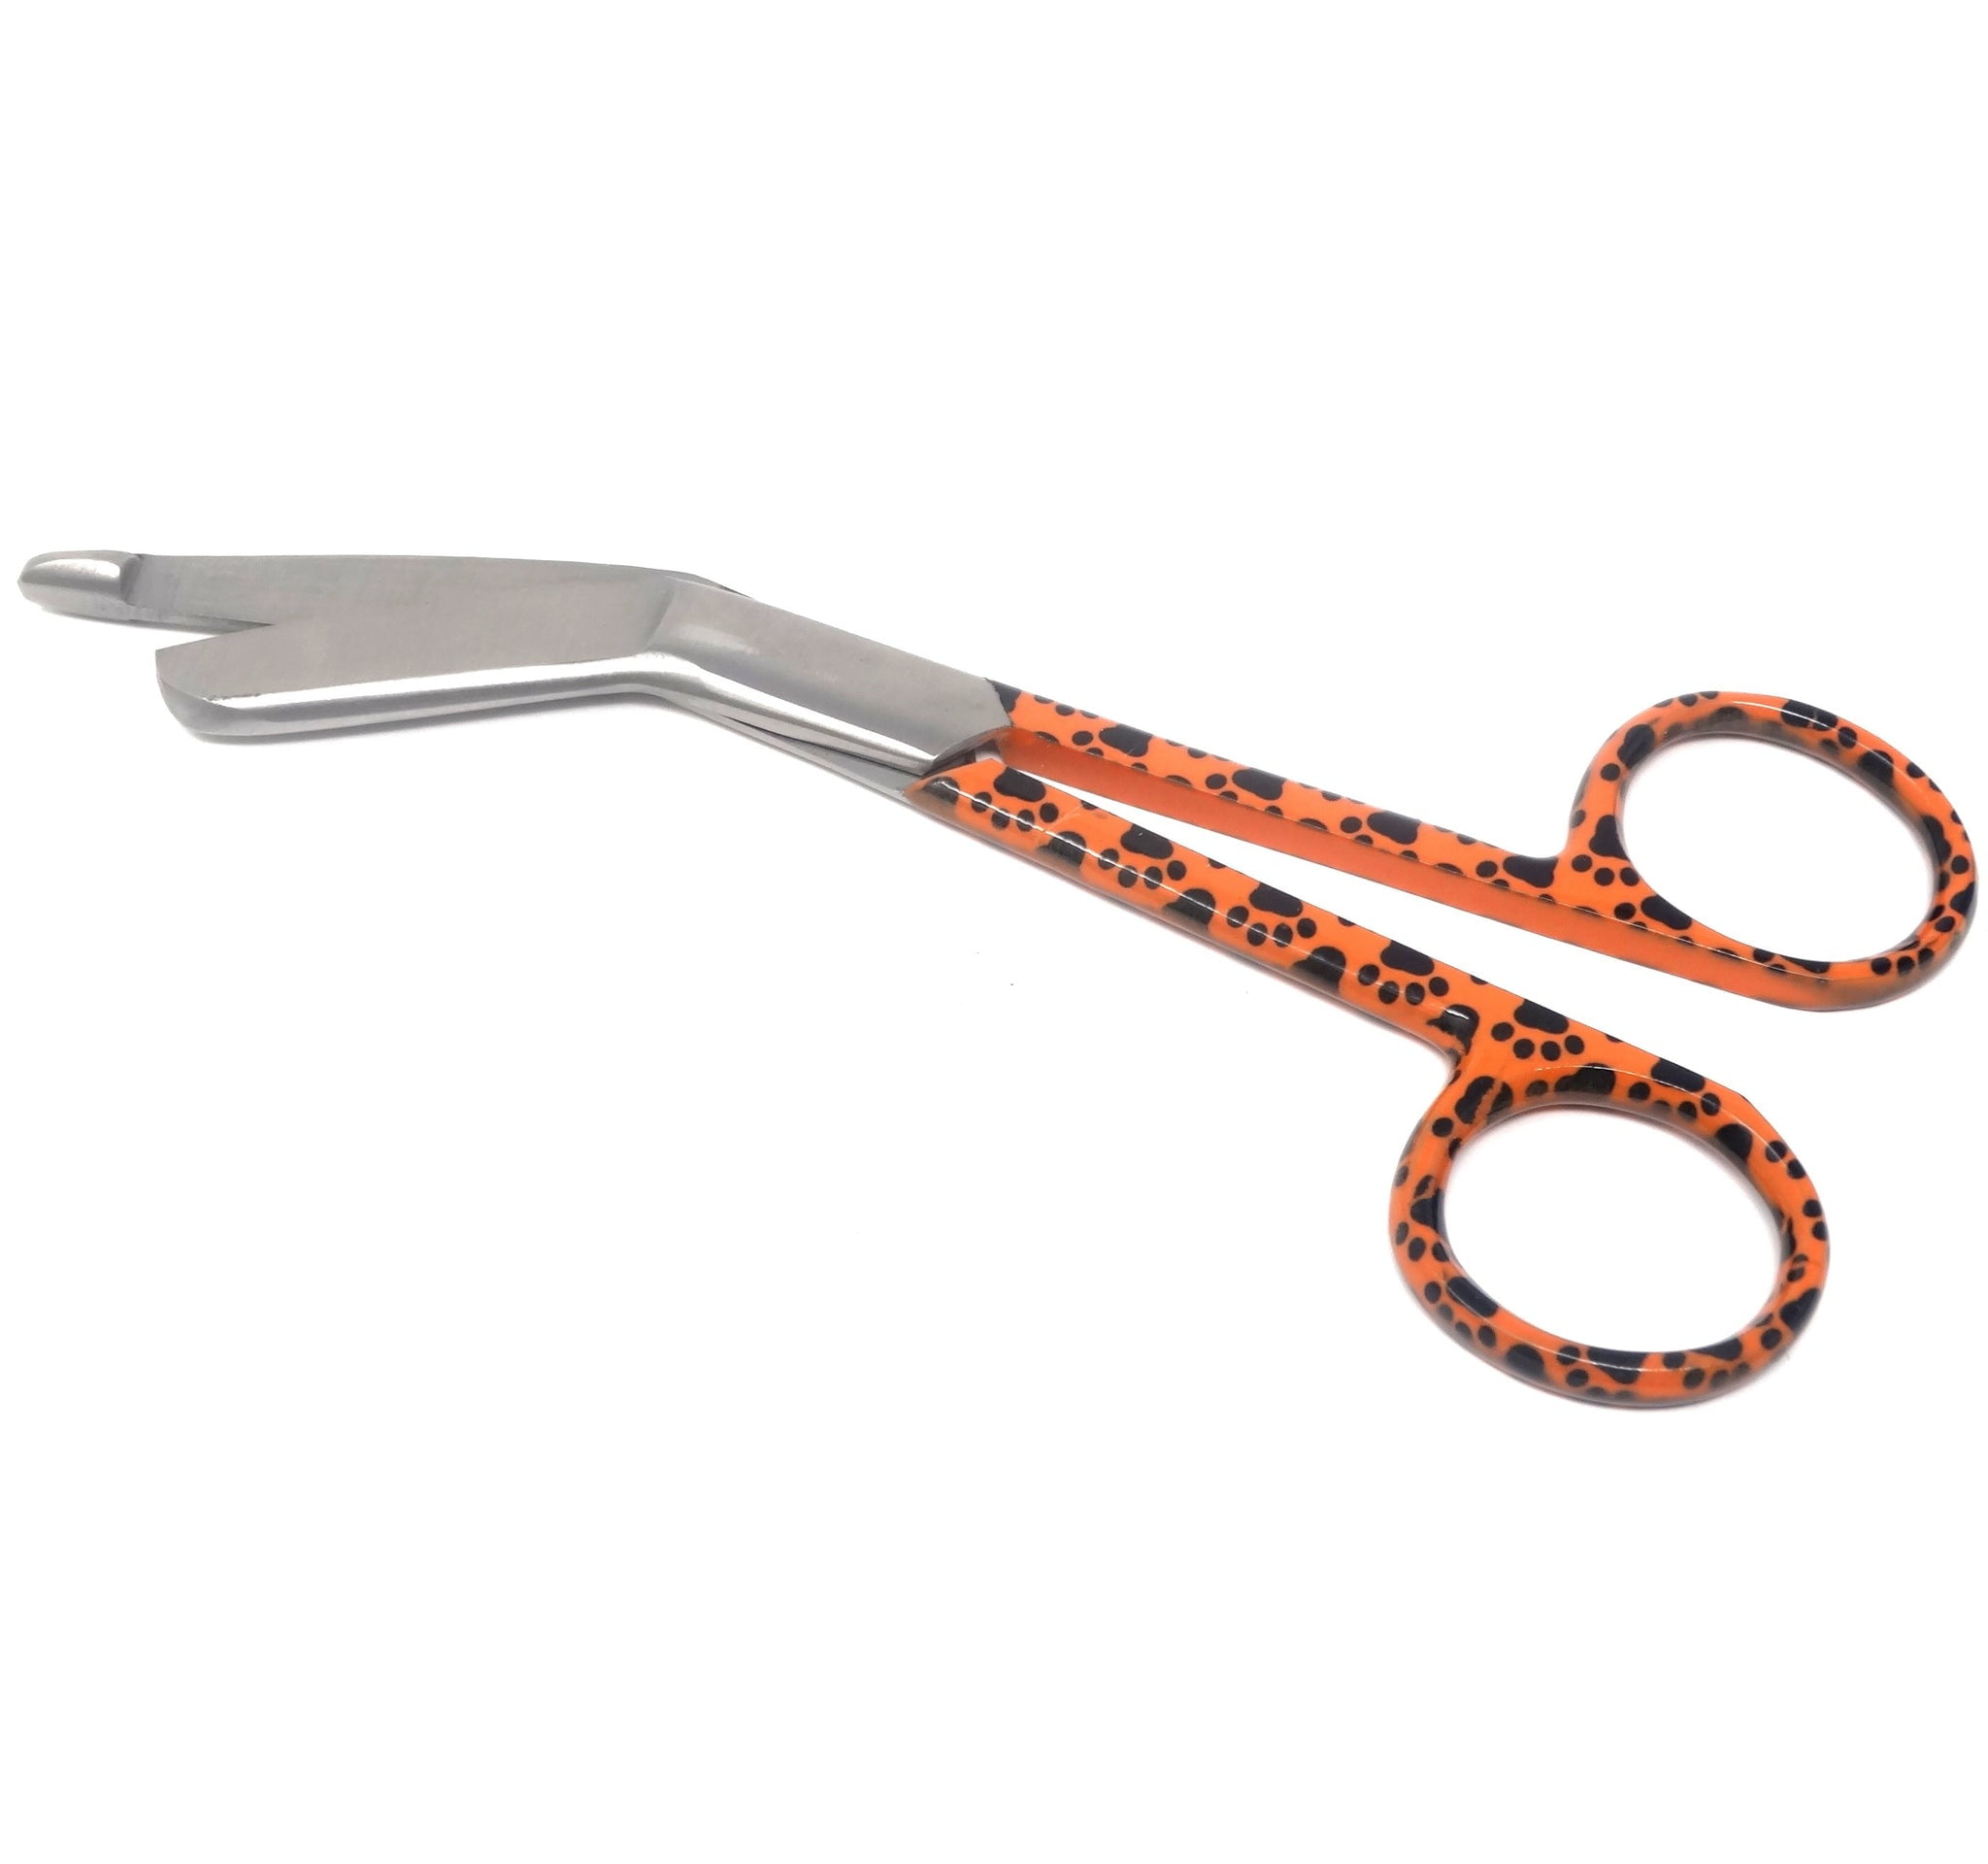 High Precision Spring Scissors 4.5 (11.4cm) Curved, Made of Premium  Quality Stainless Steel Extra Sharp Ideal for Doctors, Nurses, EMS,  Students